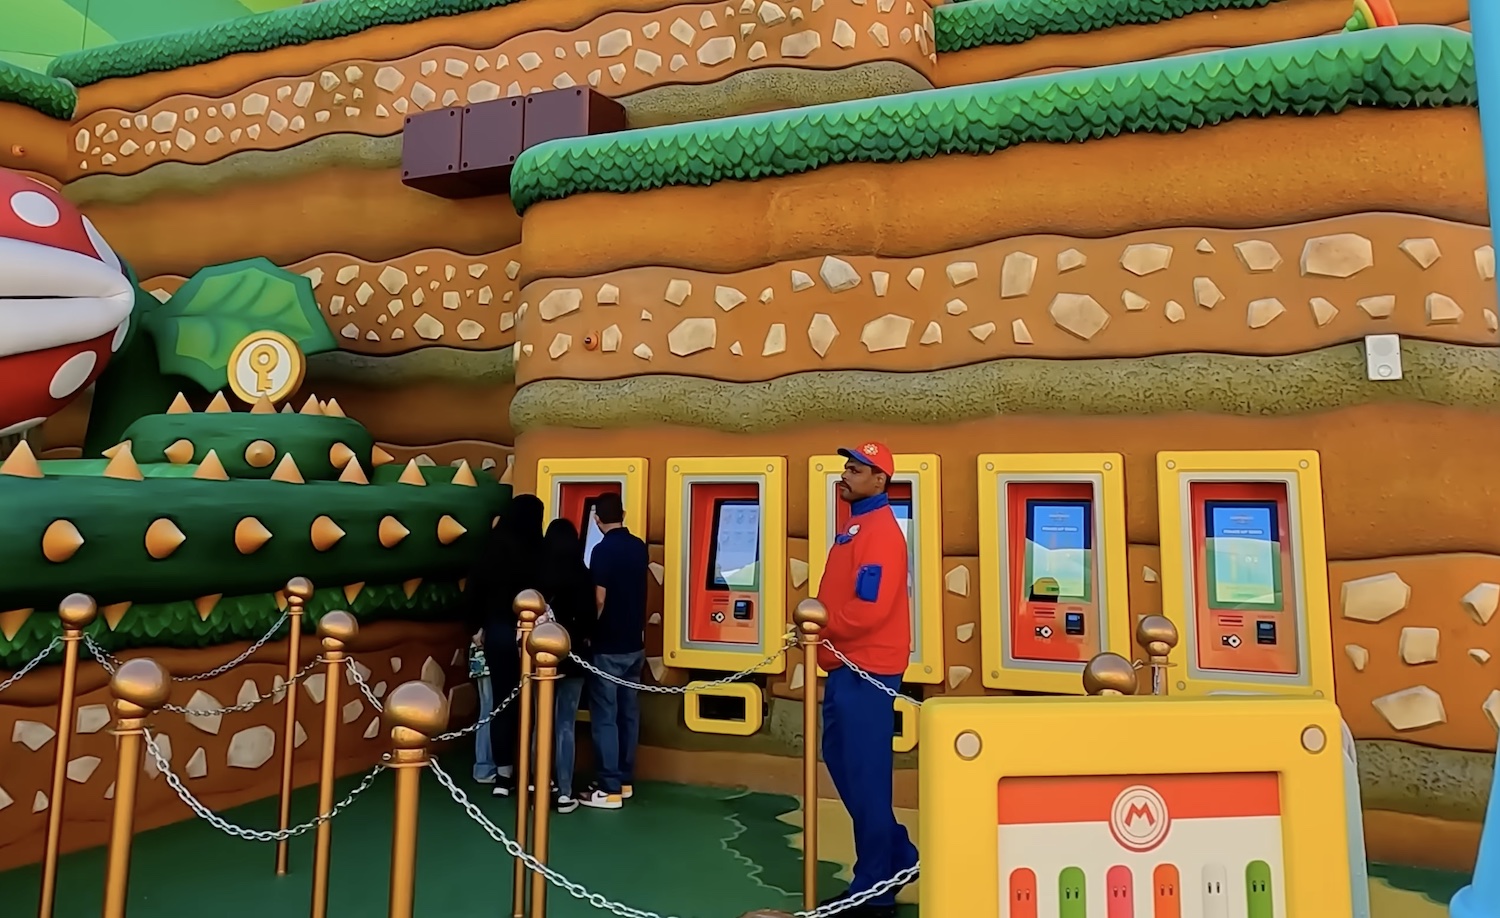 A few people stand around one of the five Power Band kiosks that are built into a wall. There's a bored employee guarding the mushroom stanchions.